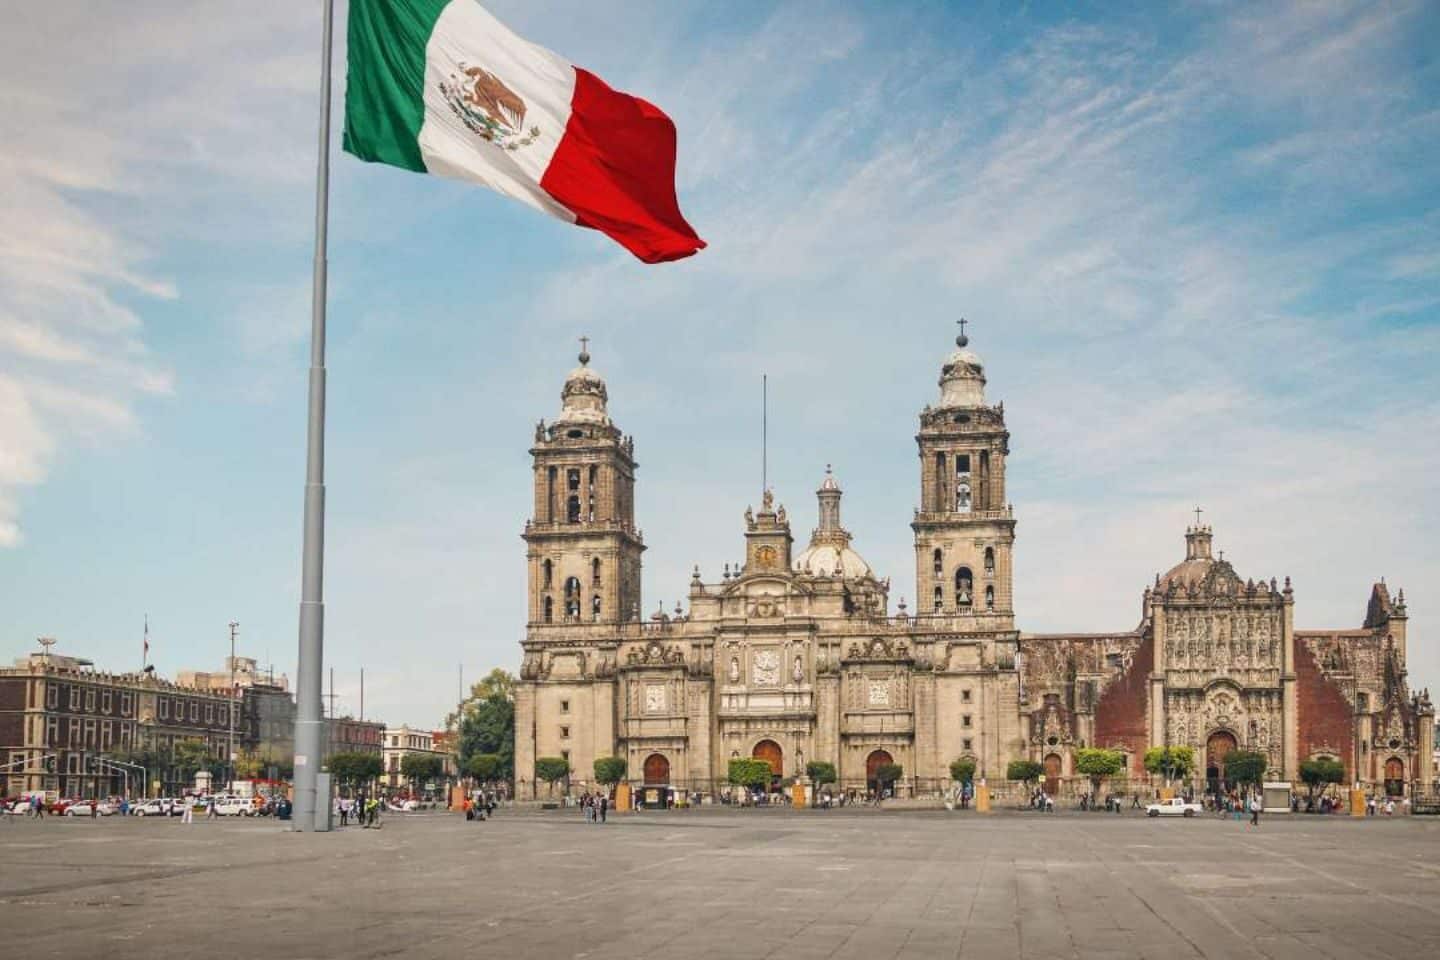 An image of Mexico City with flag pole.